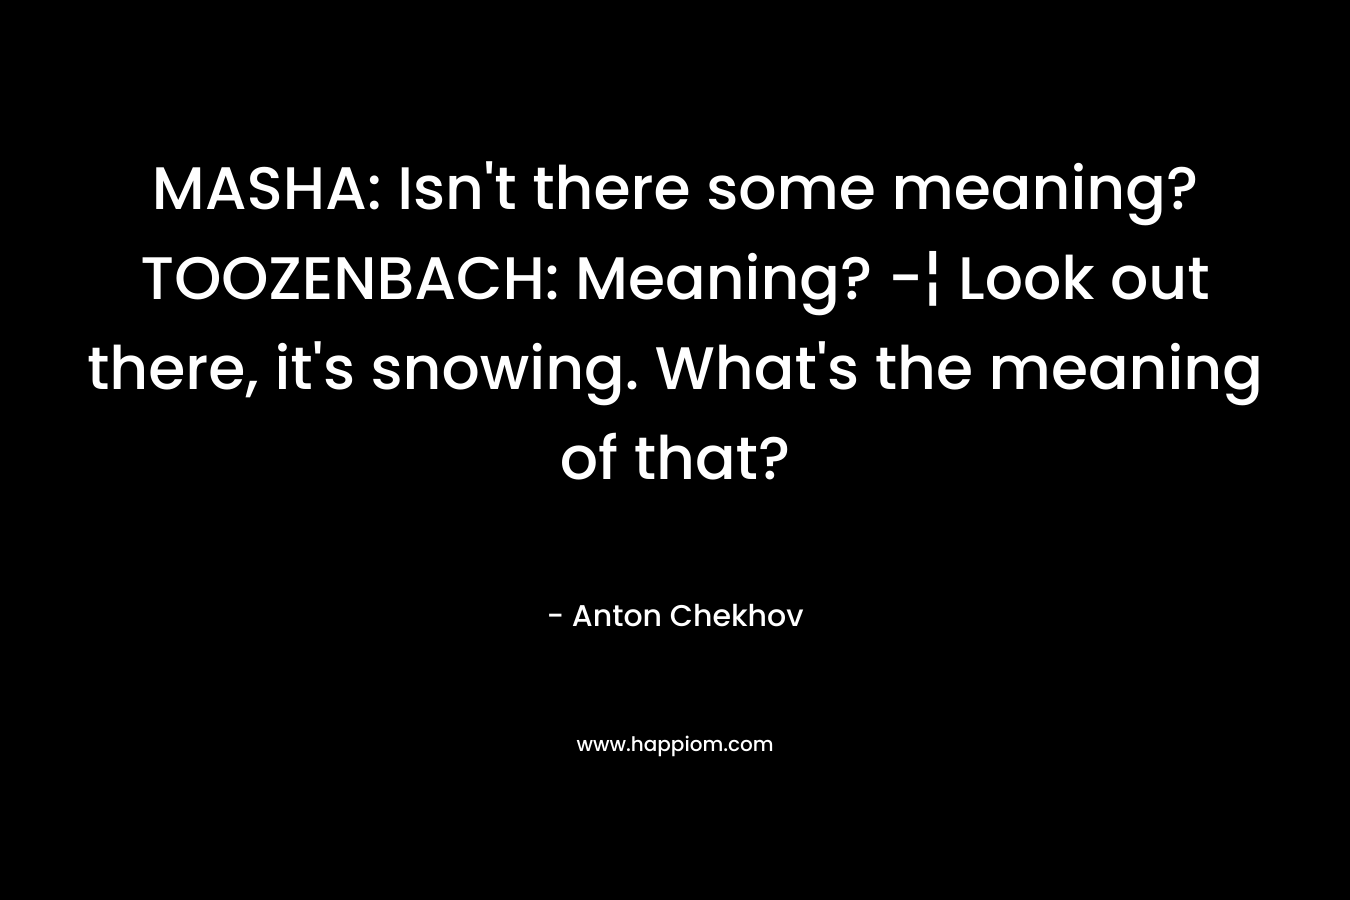 MASHA: Isn't there some meaning?TOOZENBACH: Meaning? -¦ Look out there, it's snowing. What's the meaning of that?